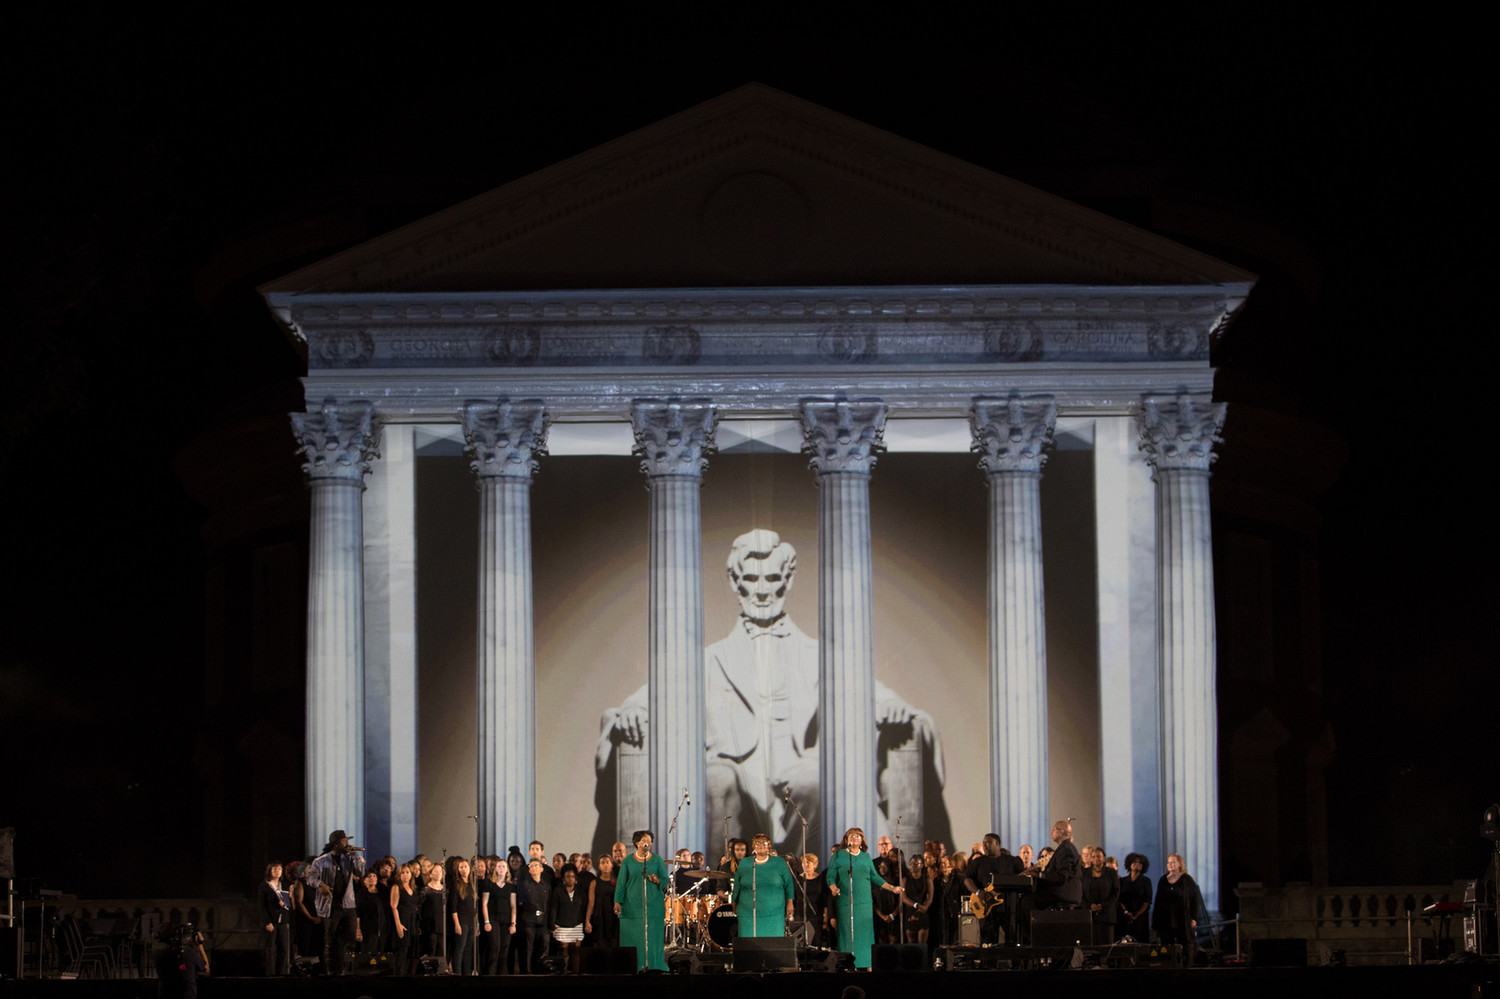 The Ingramettes in front of the a projection mapped to show the Lincoln Memorial.